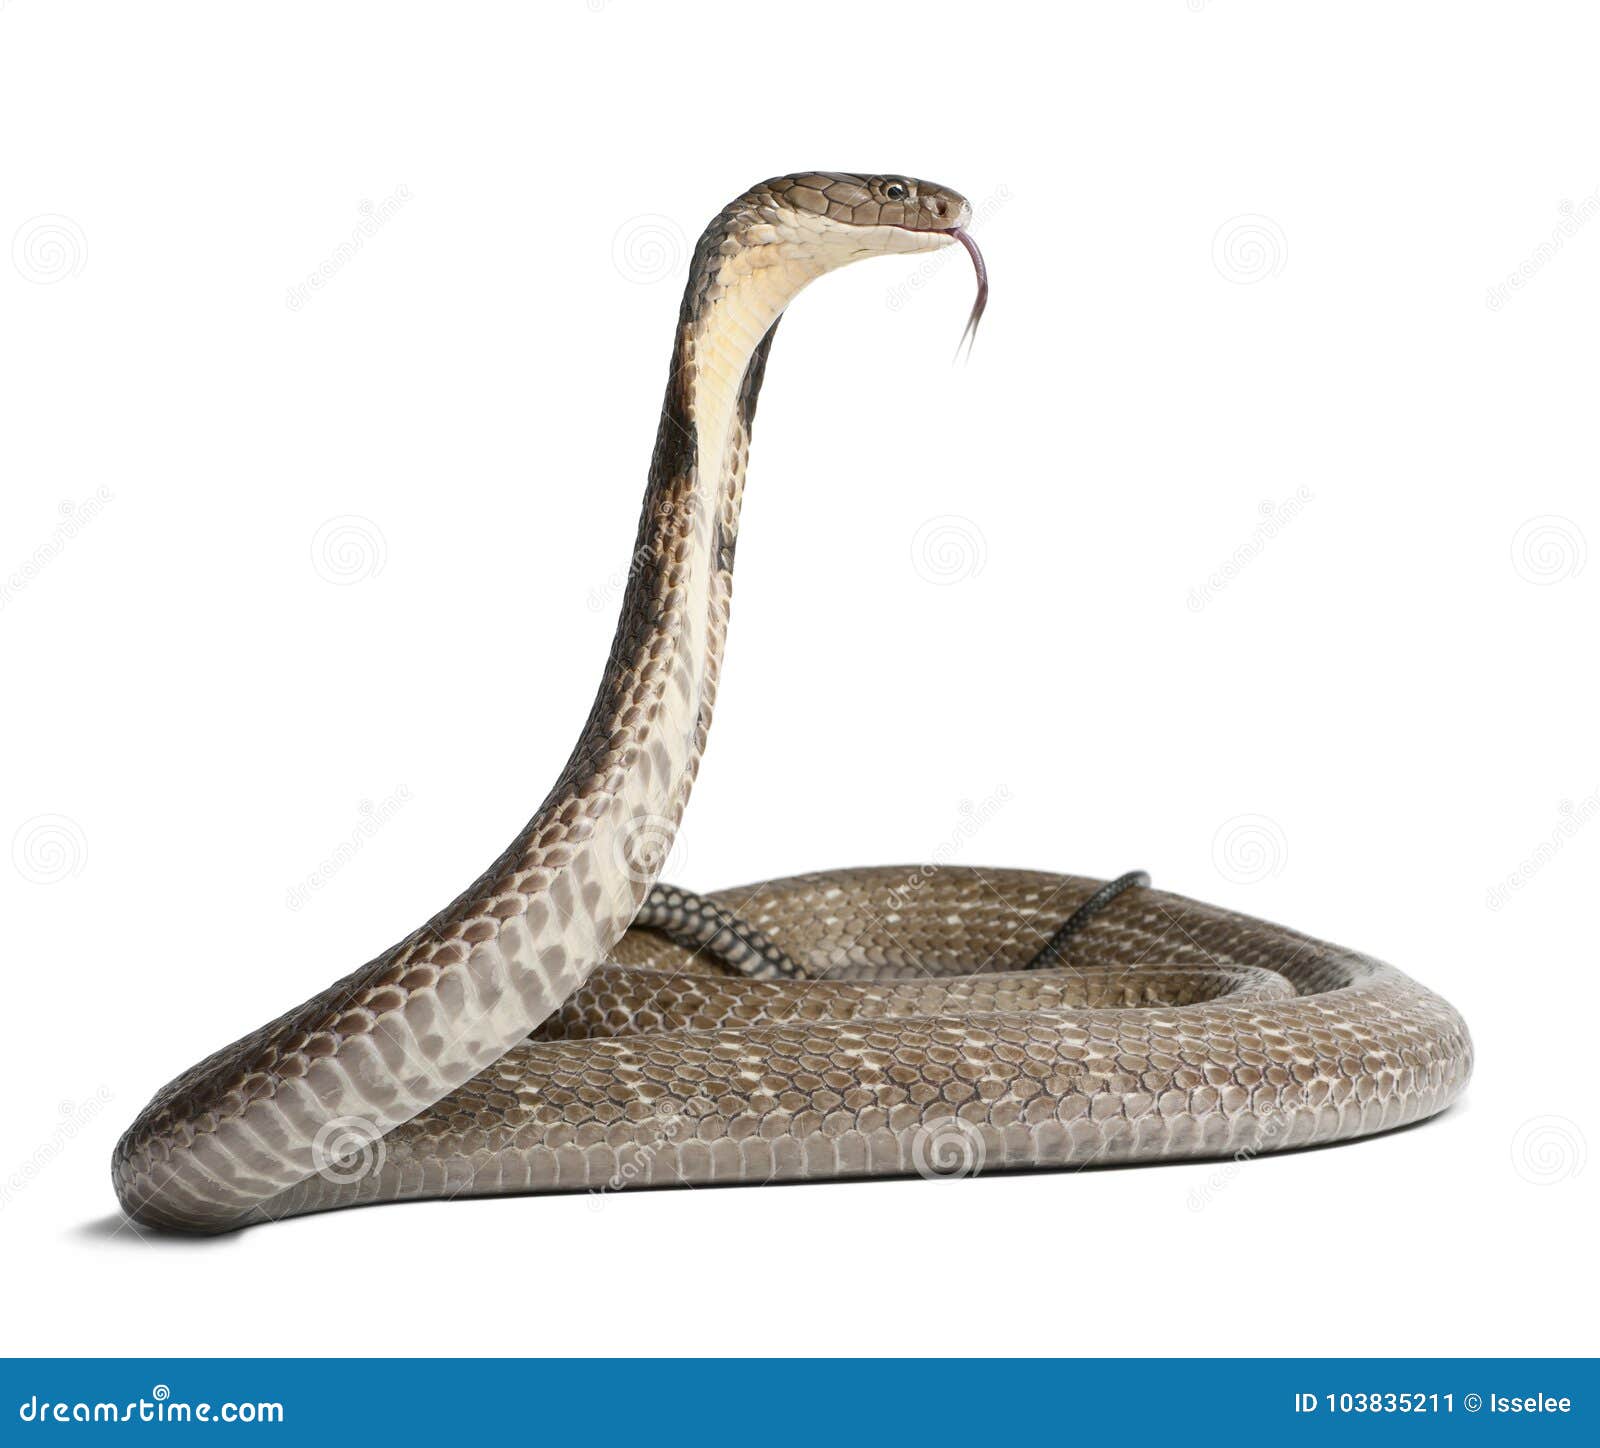 king cobra - ophiophagus hannah, poisonous, white background